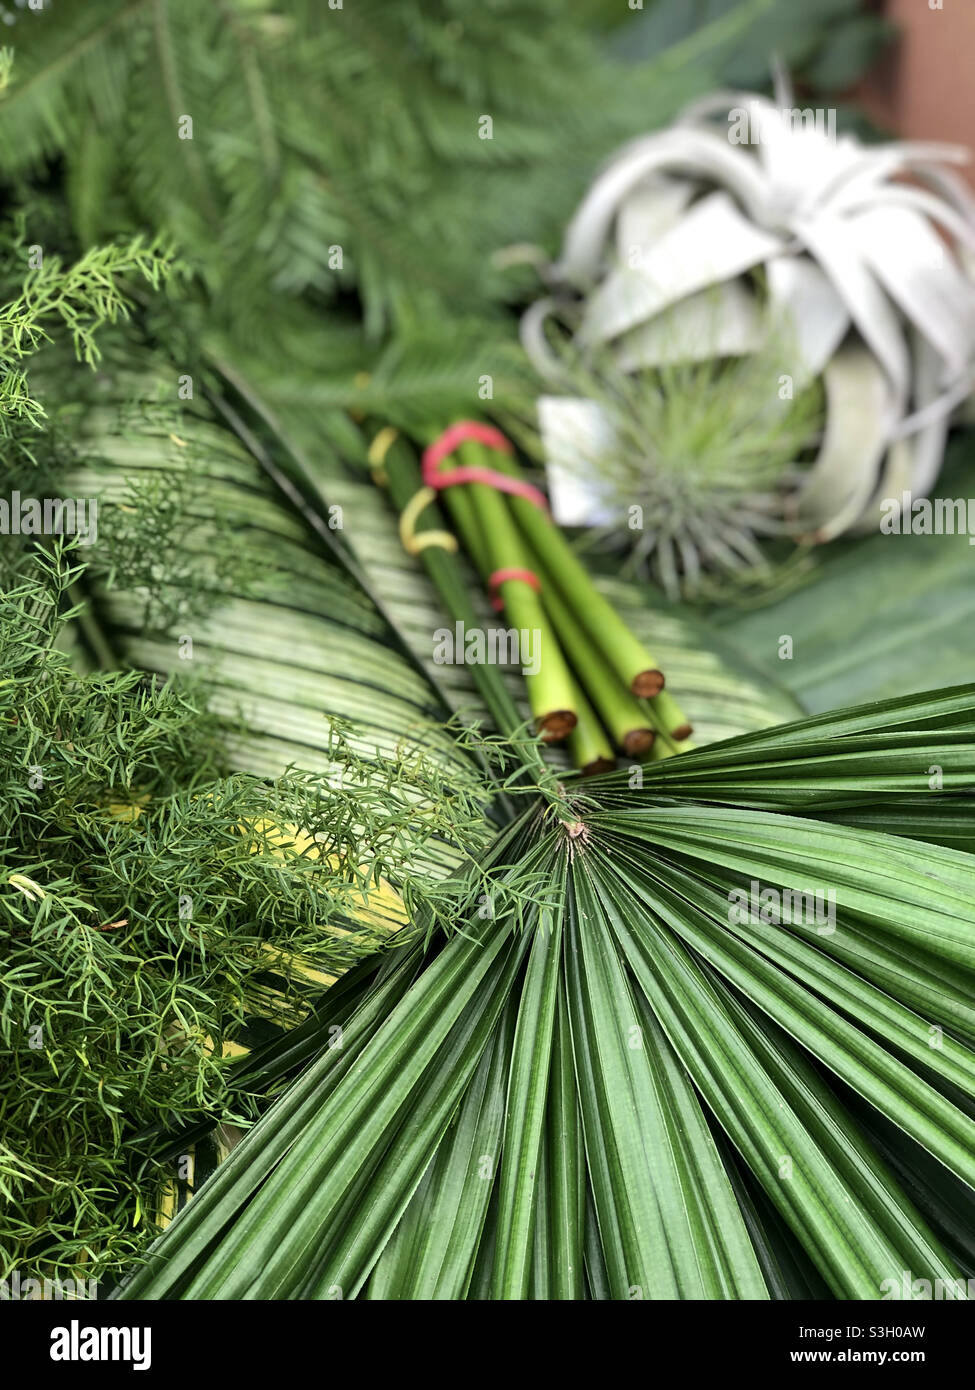 Flower arranging greenery with palms & tillandsia xerographica Stock Photo